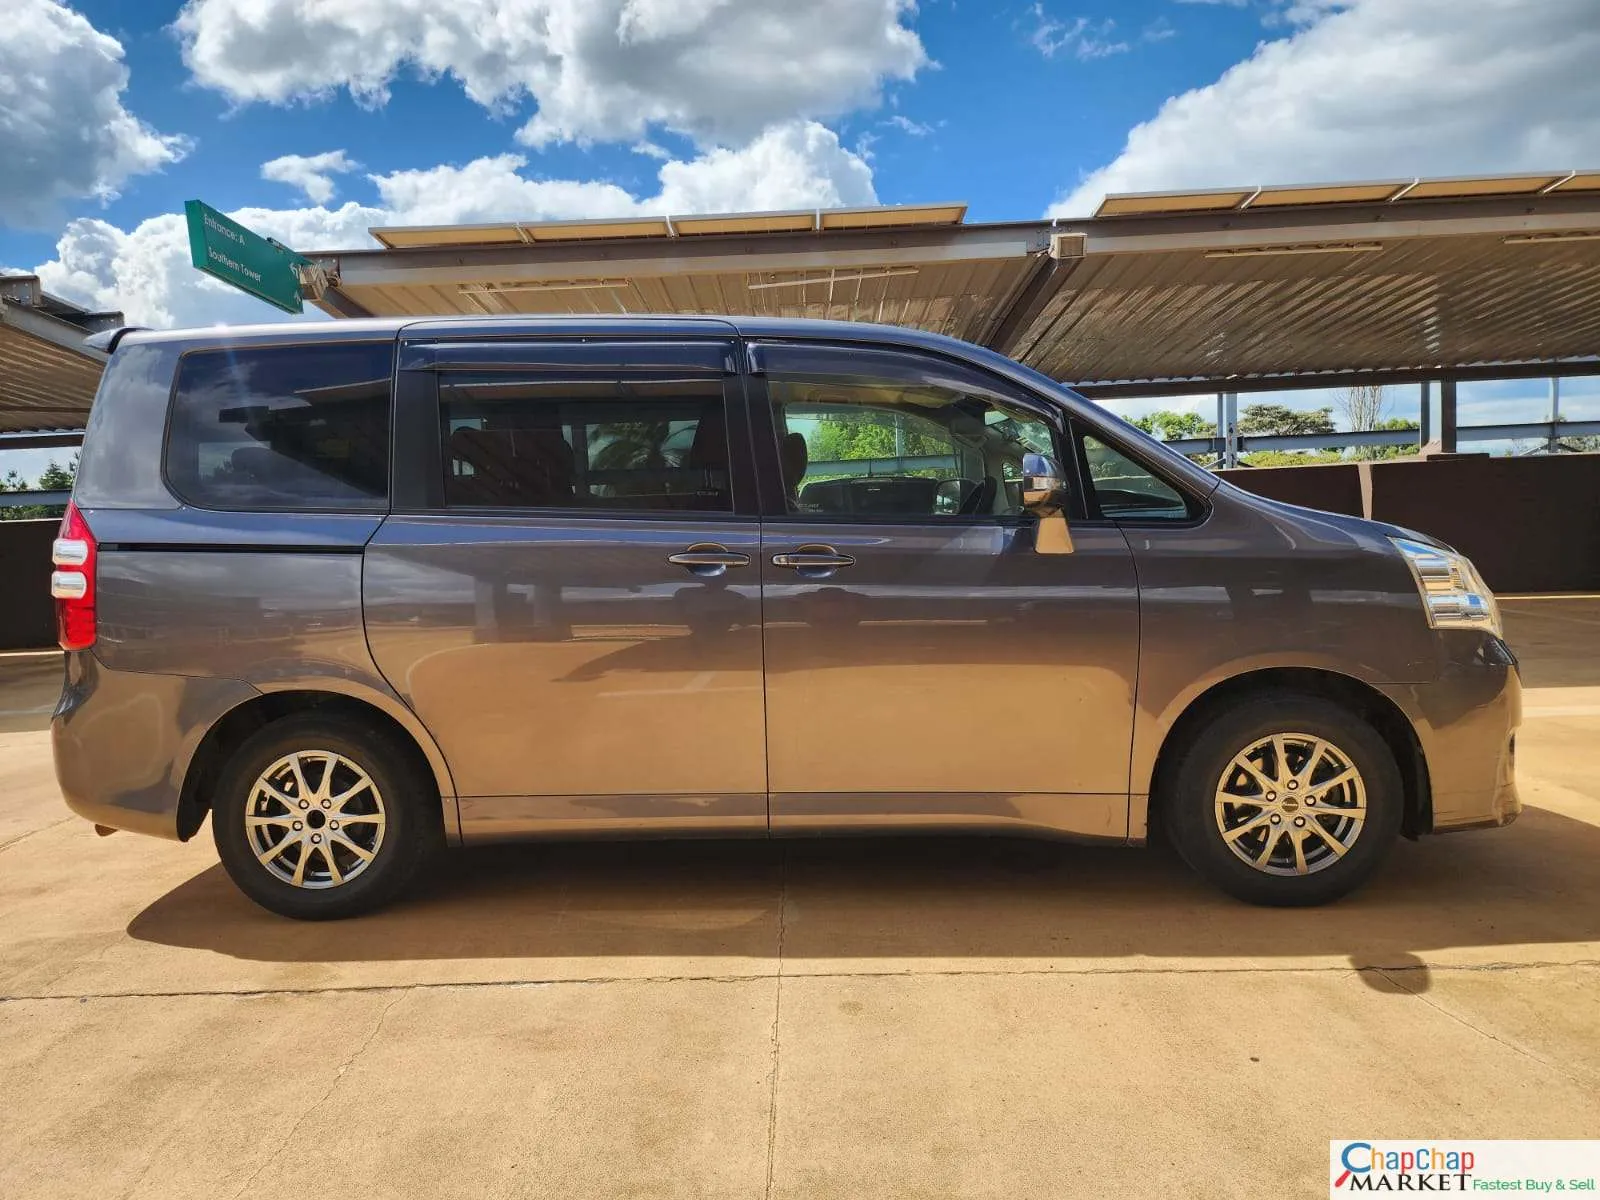 Cars Cars For Sale-Toyota NOAH kenya You Pay 30% Deposit Trade in OK Toyota Noah for sale in kenya hire purchase installments EXCLUSIVE 9